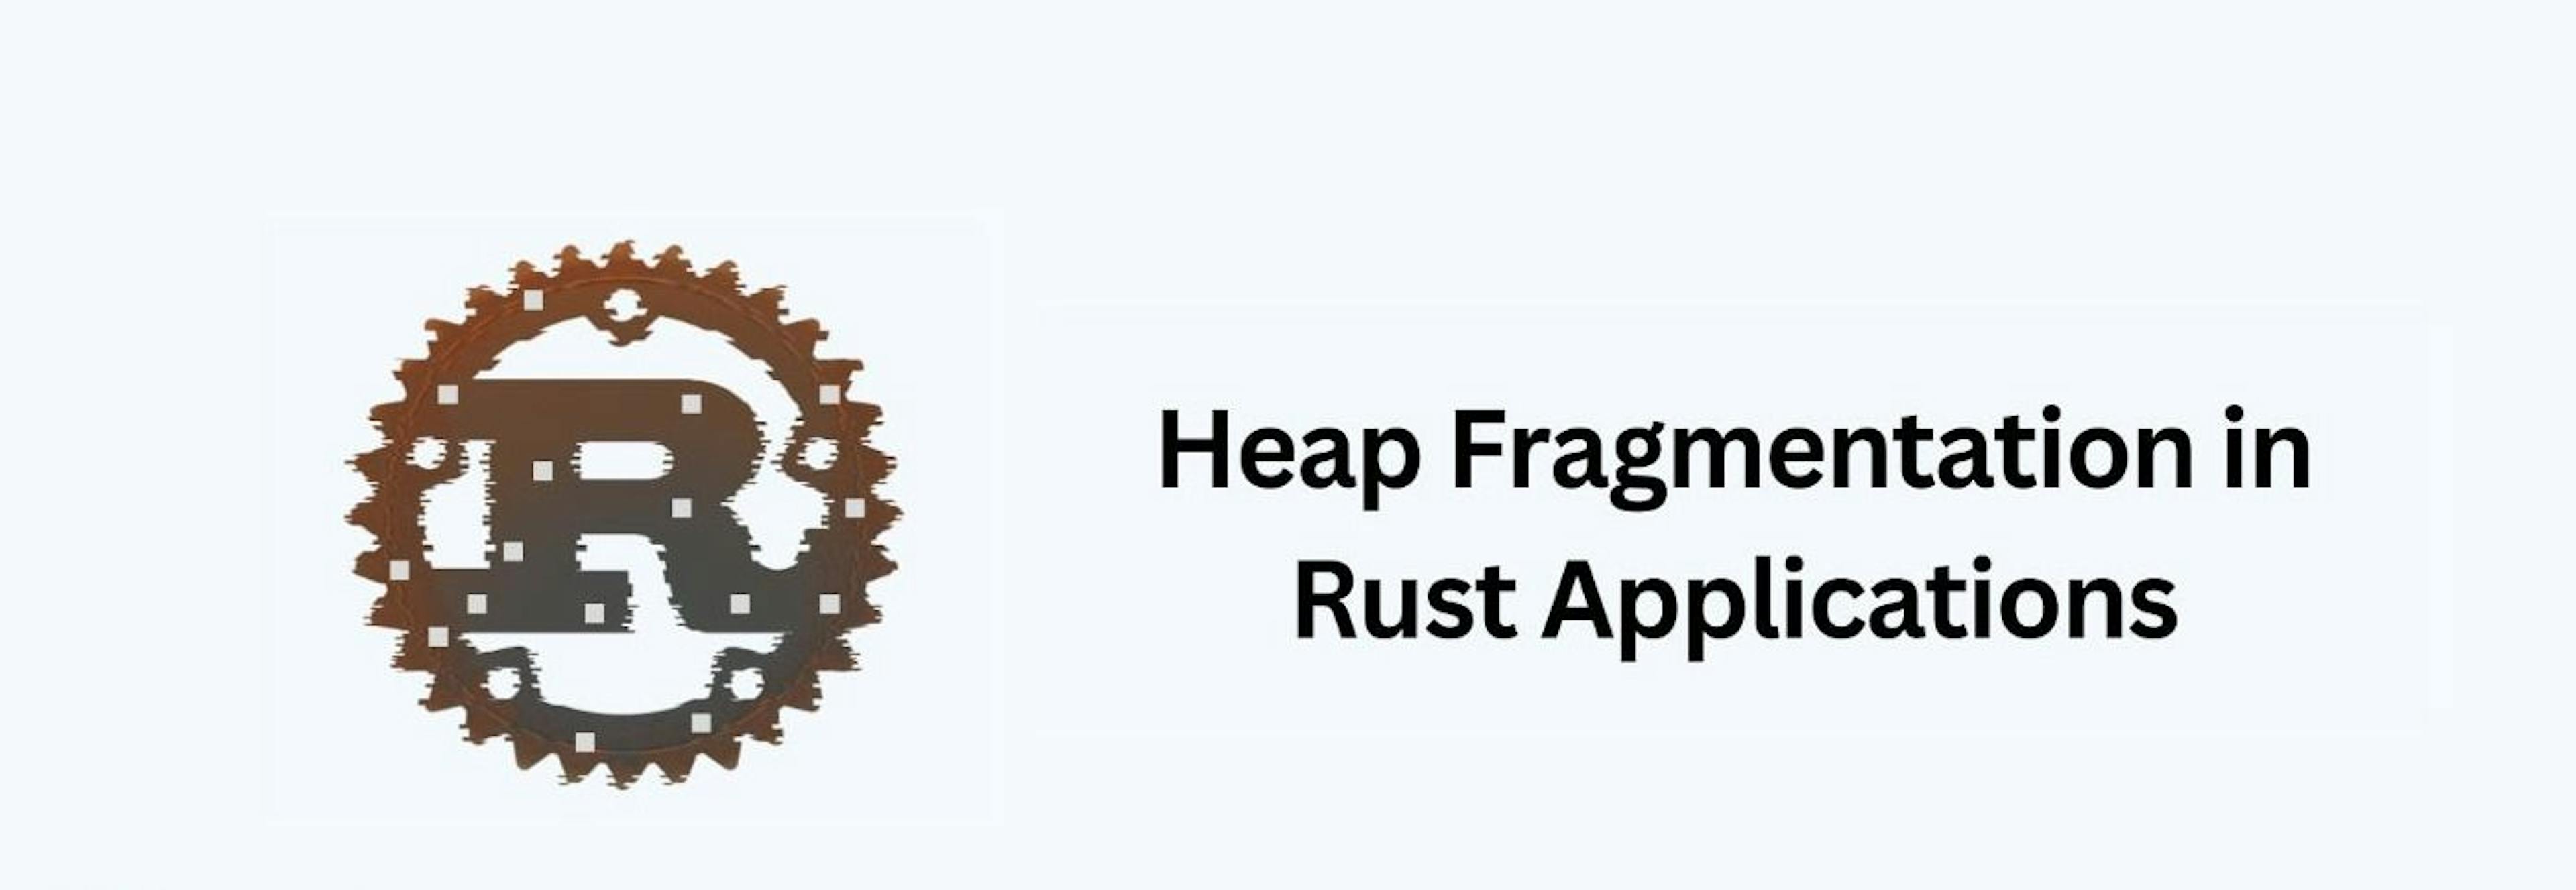 featured image - How to Spot and Avoid Heap Fragmentation in Rust Applications